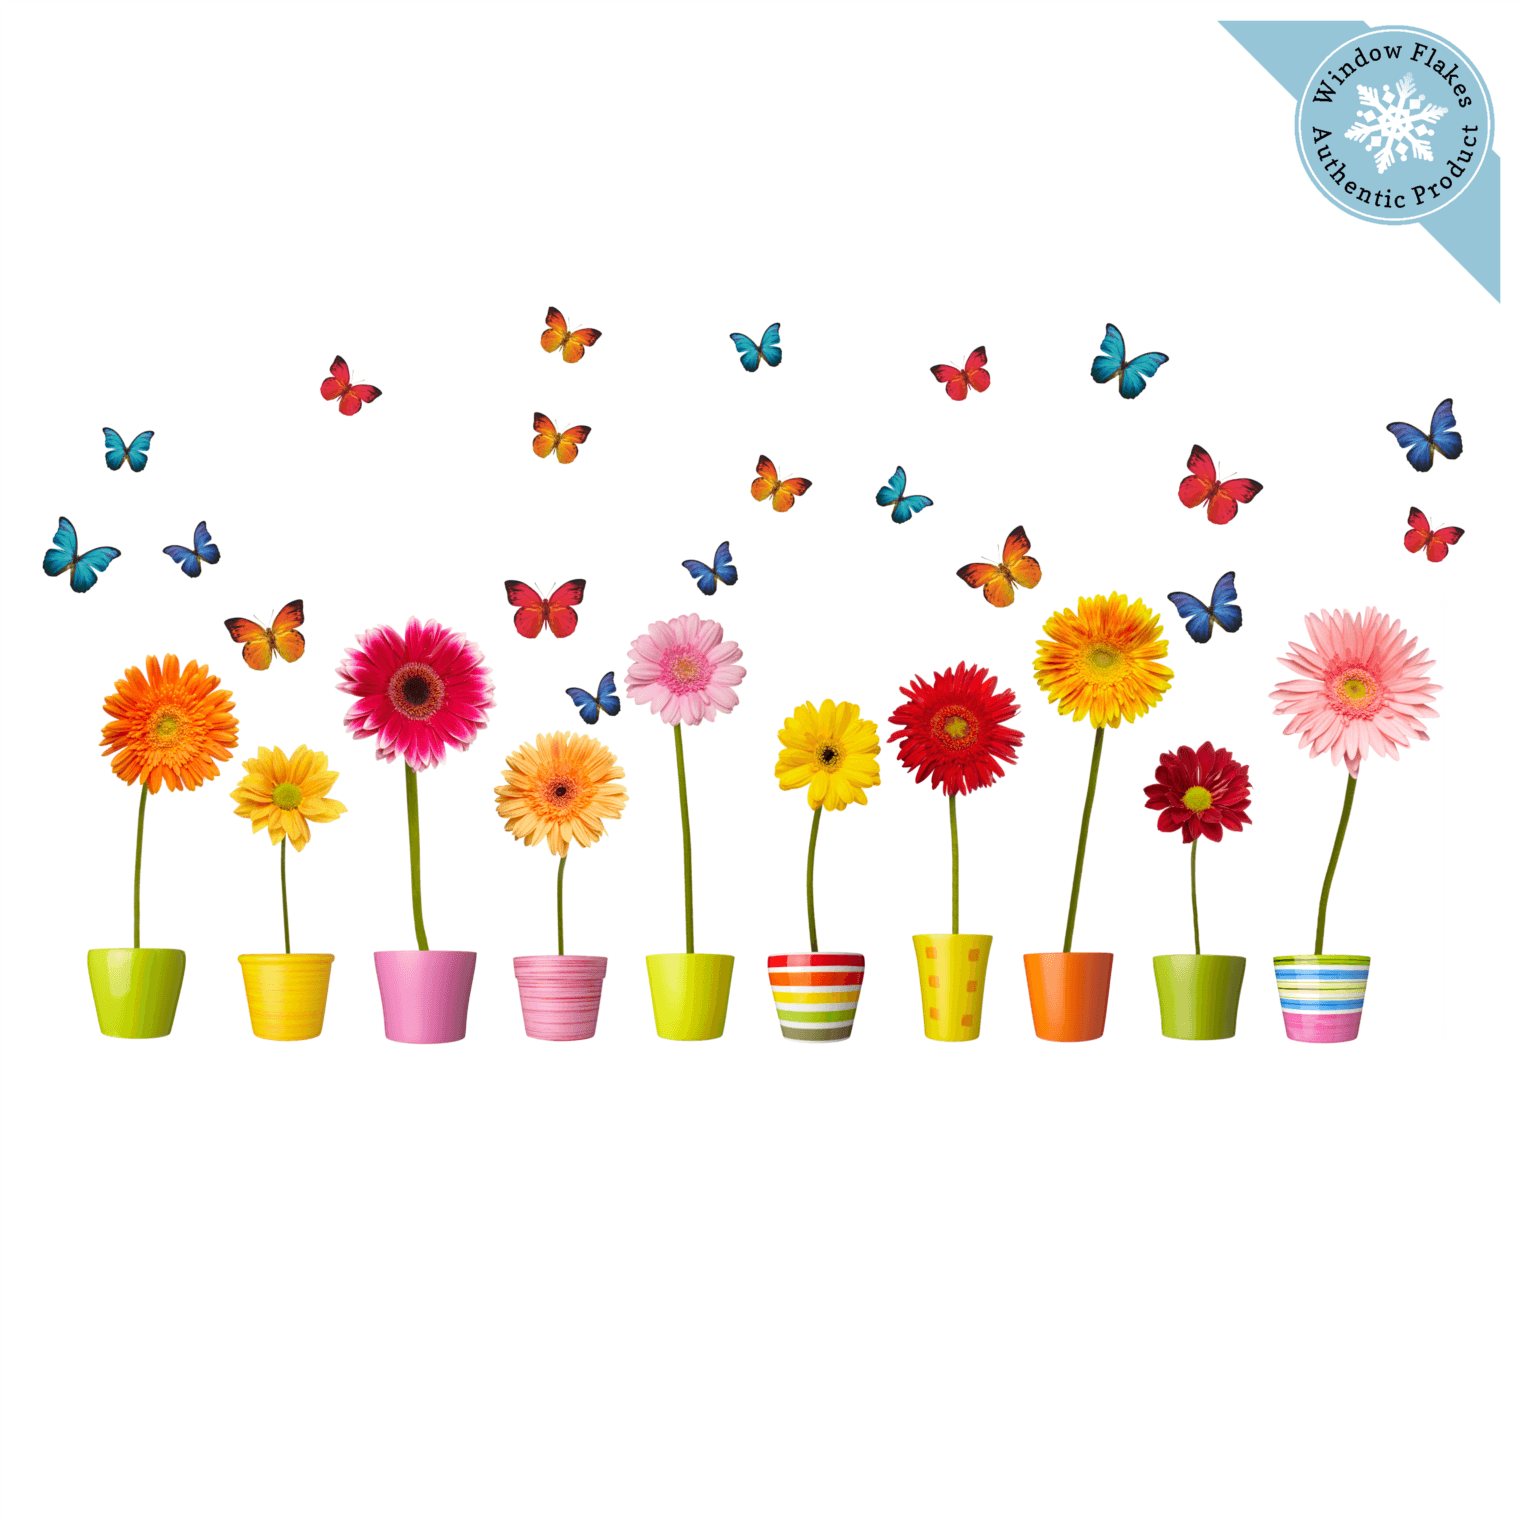 Butterfly And Flowers Decal